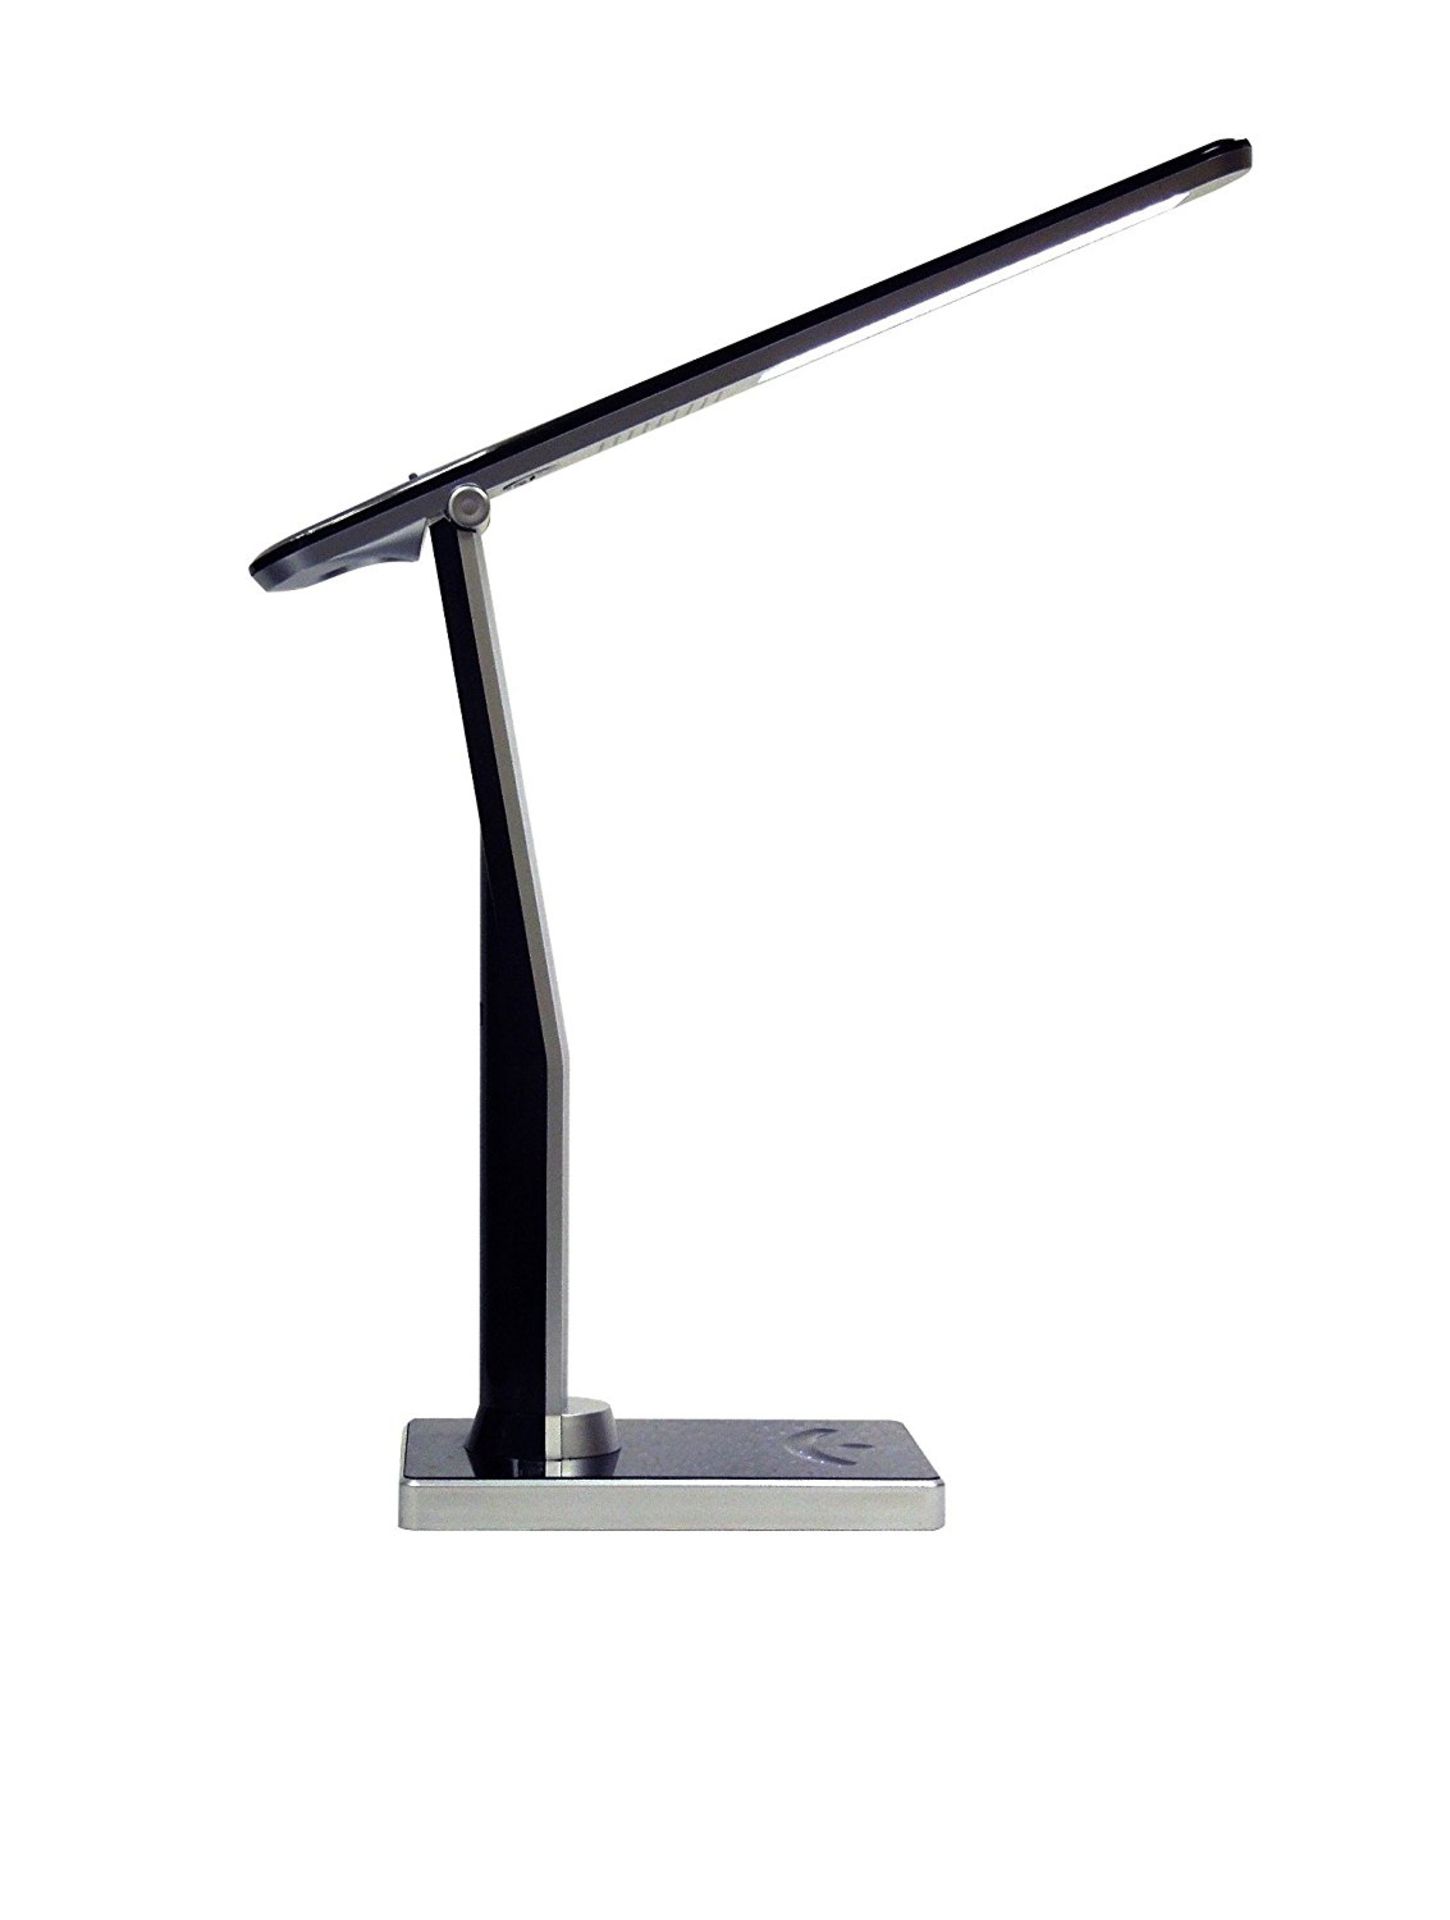 V Brand New Lifemax Pelican LED Light with Clock - One Touch Control For Adjustable Brightness - - Image 4 of 4